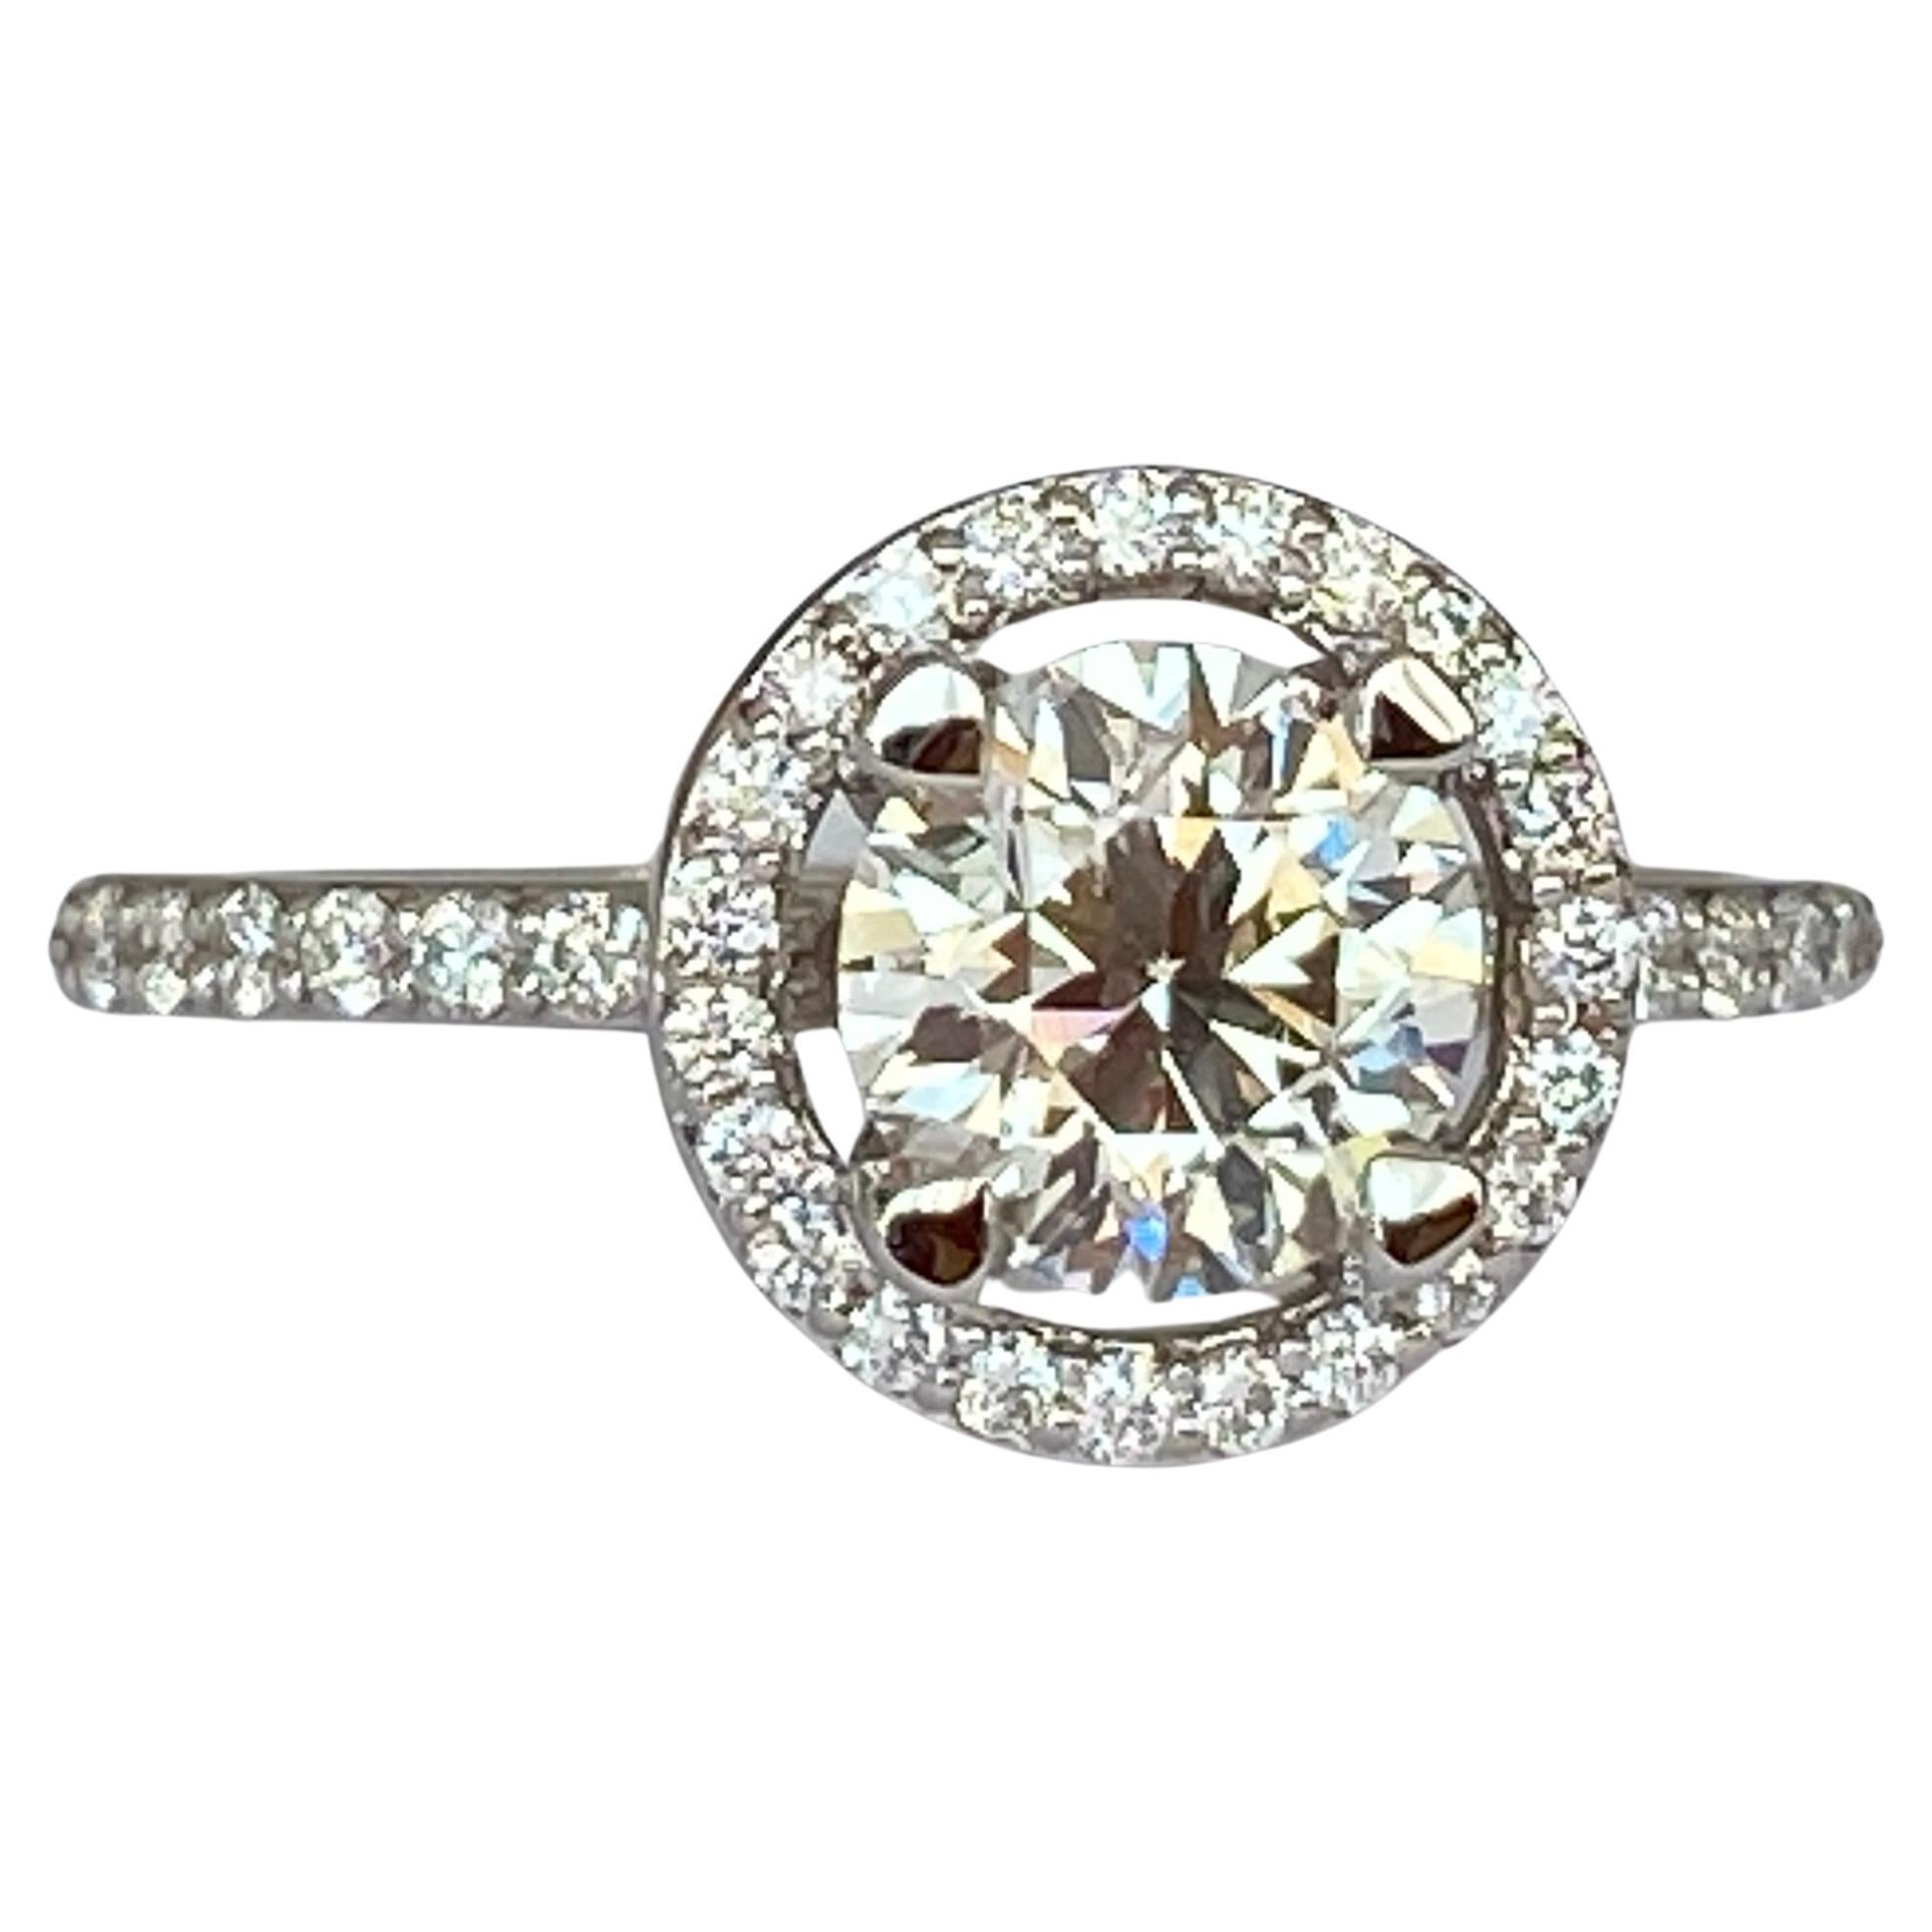 ALGT Certificied 1.36 Carat Diamond Engagement Ring For Sale